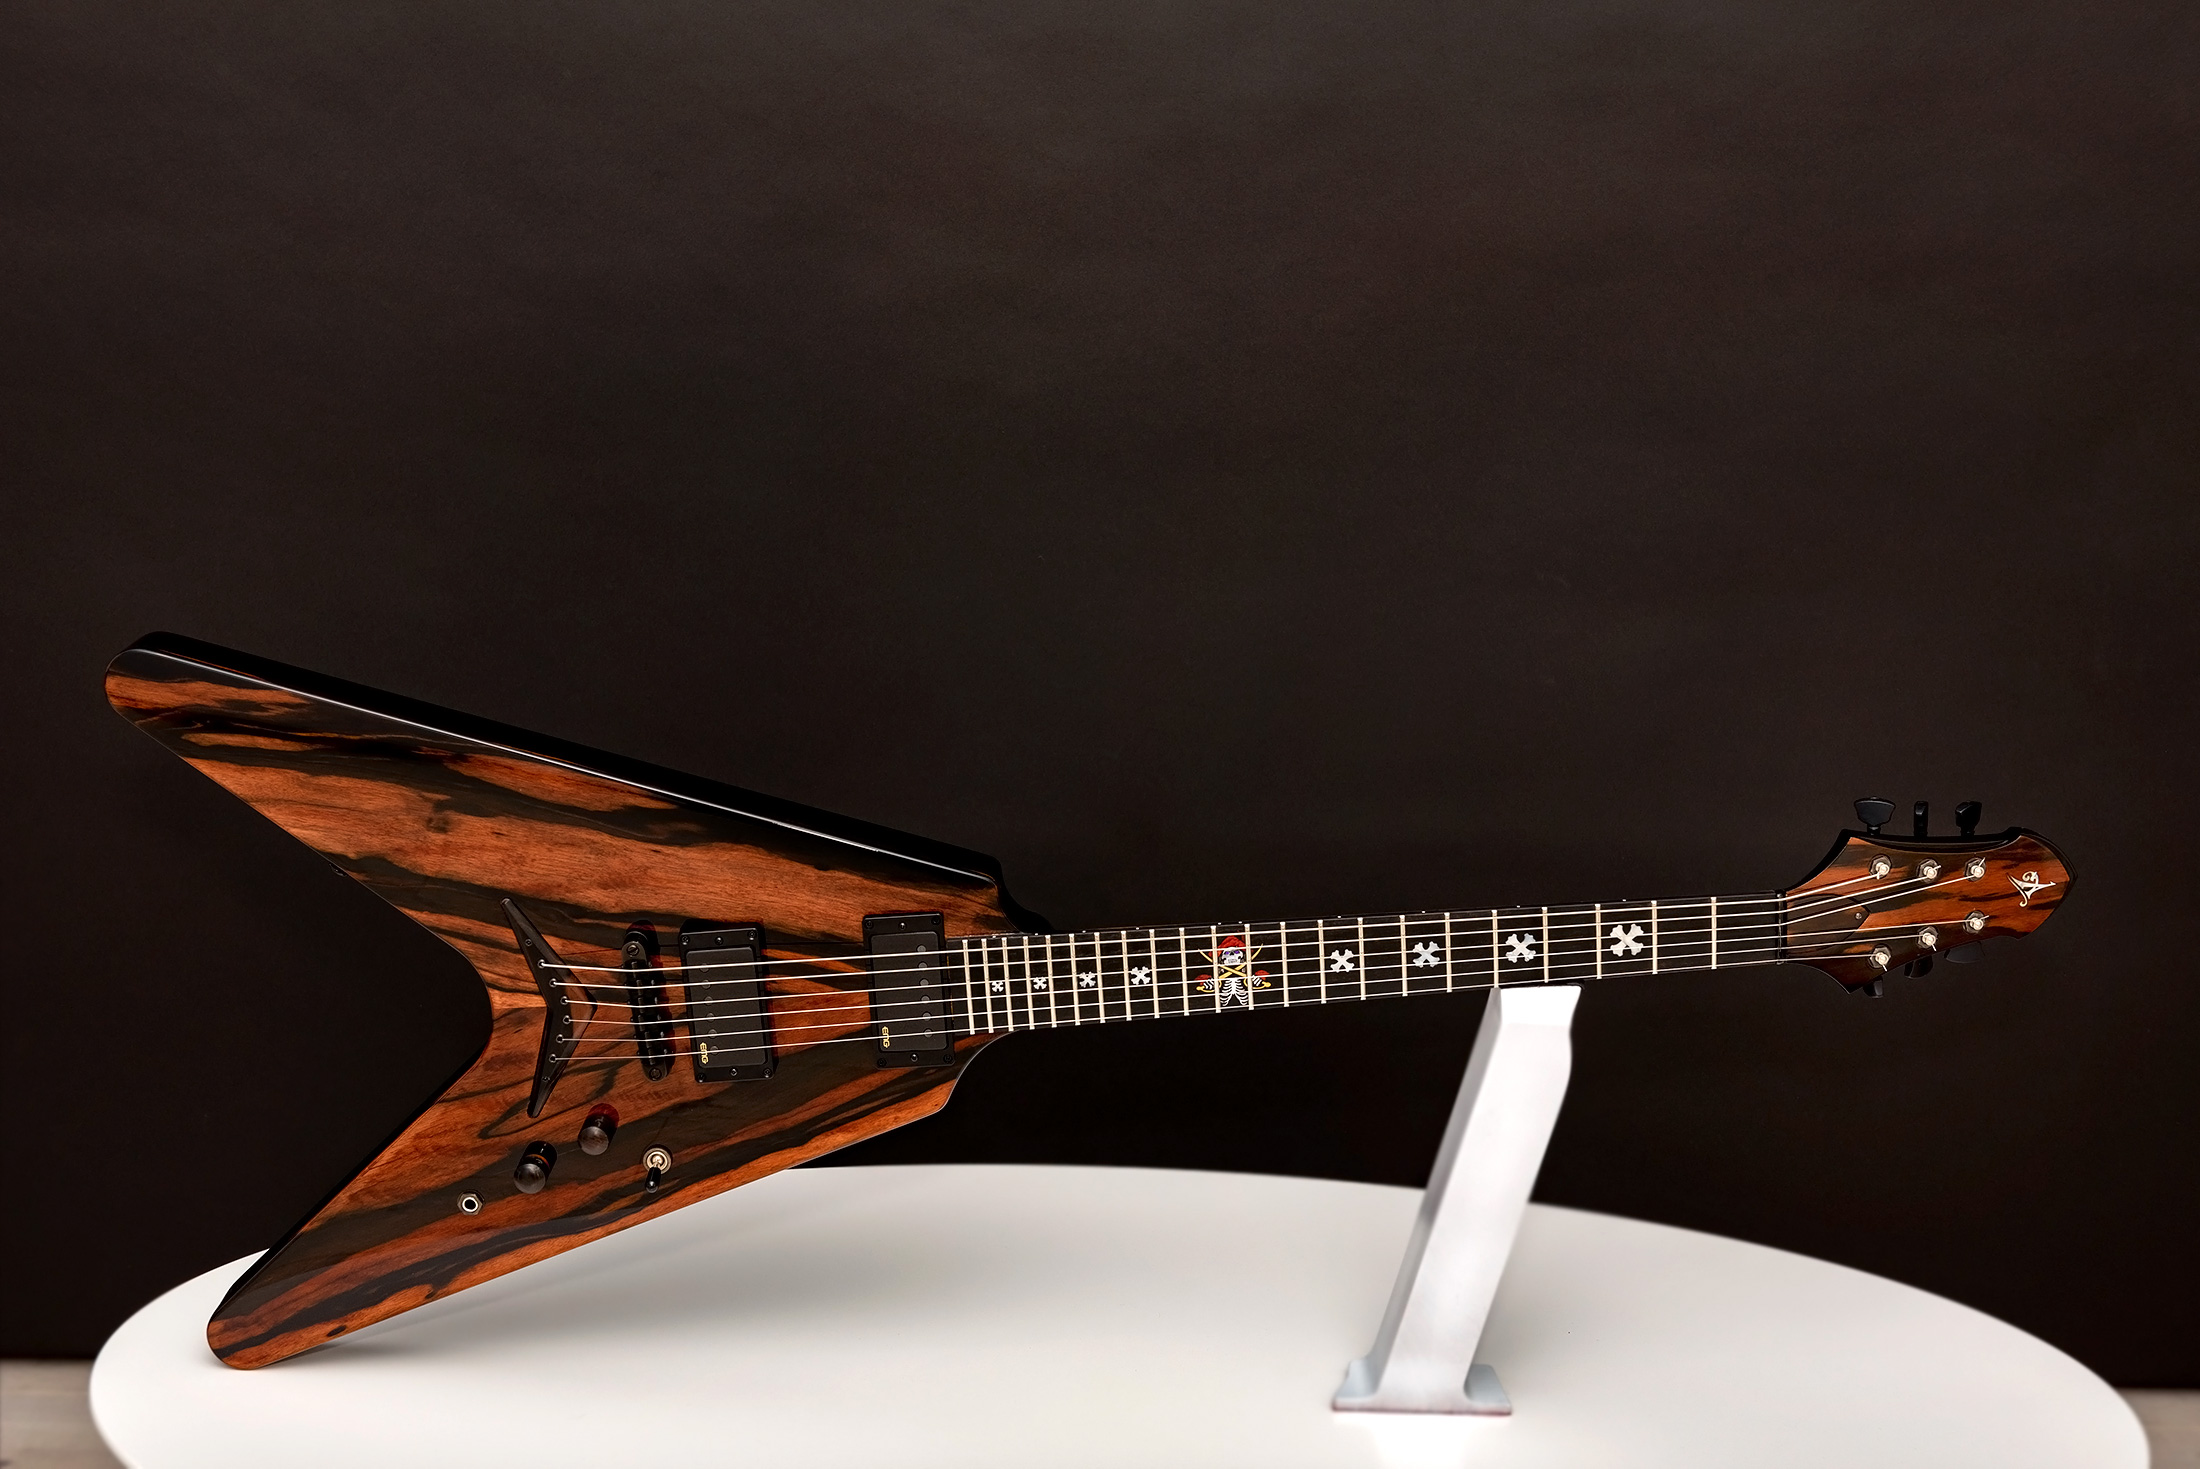 This is a custom guitar, built by a well-known luthier, Augustin Cristian Apostol (@ Avatar2100). Her name is The Pirate.